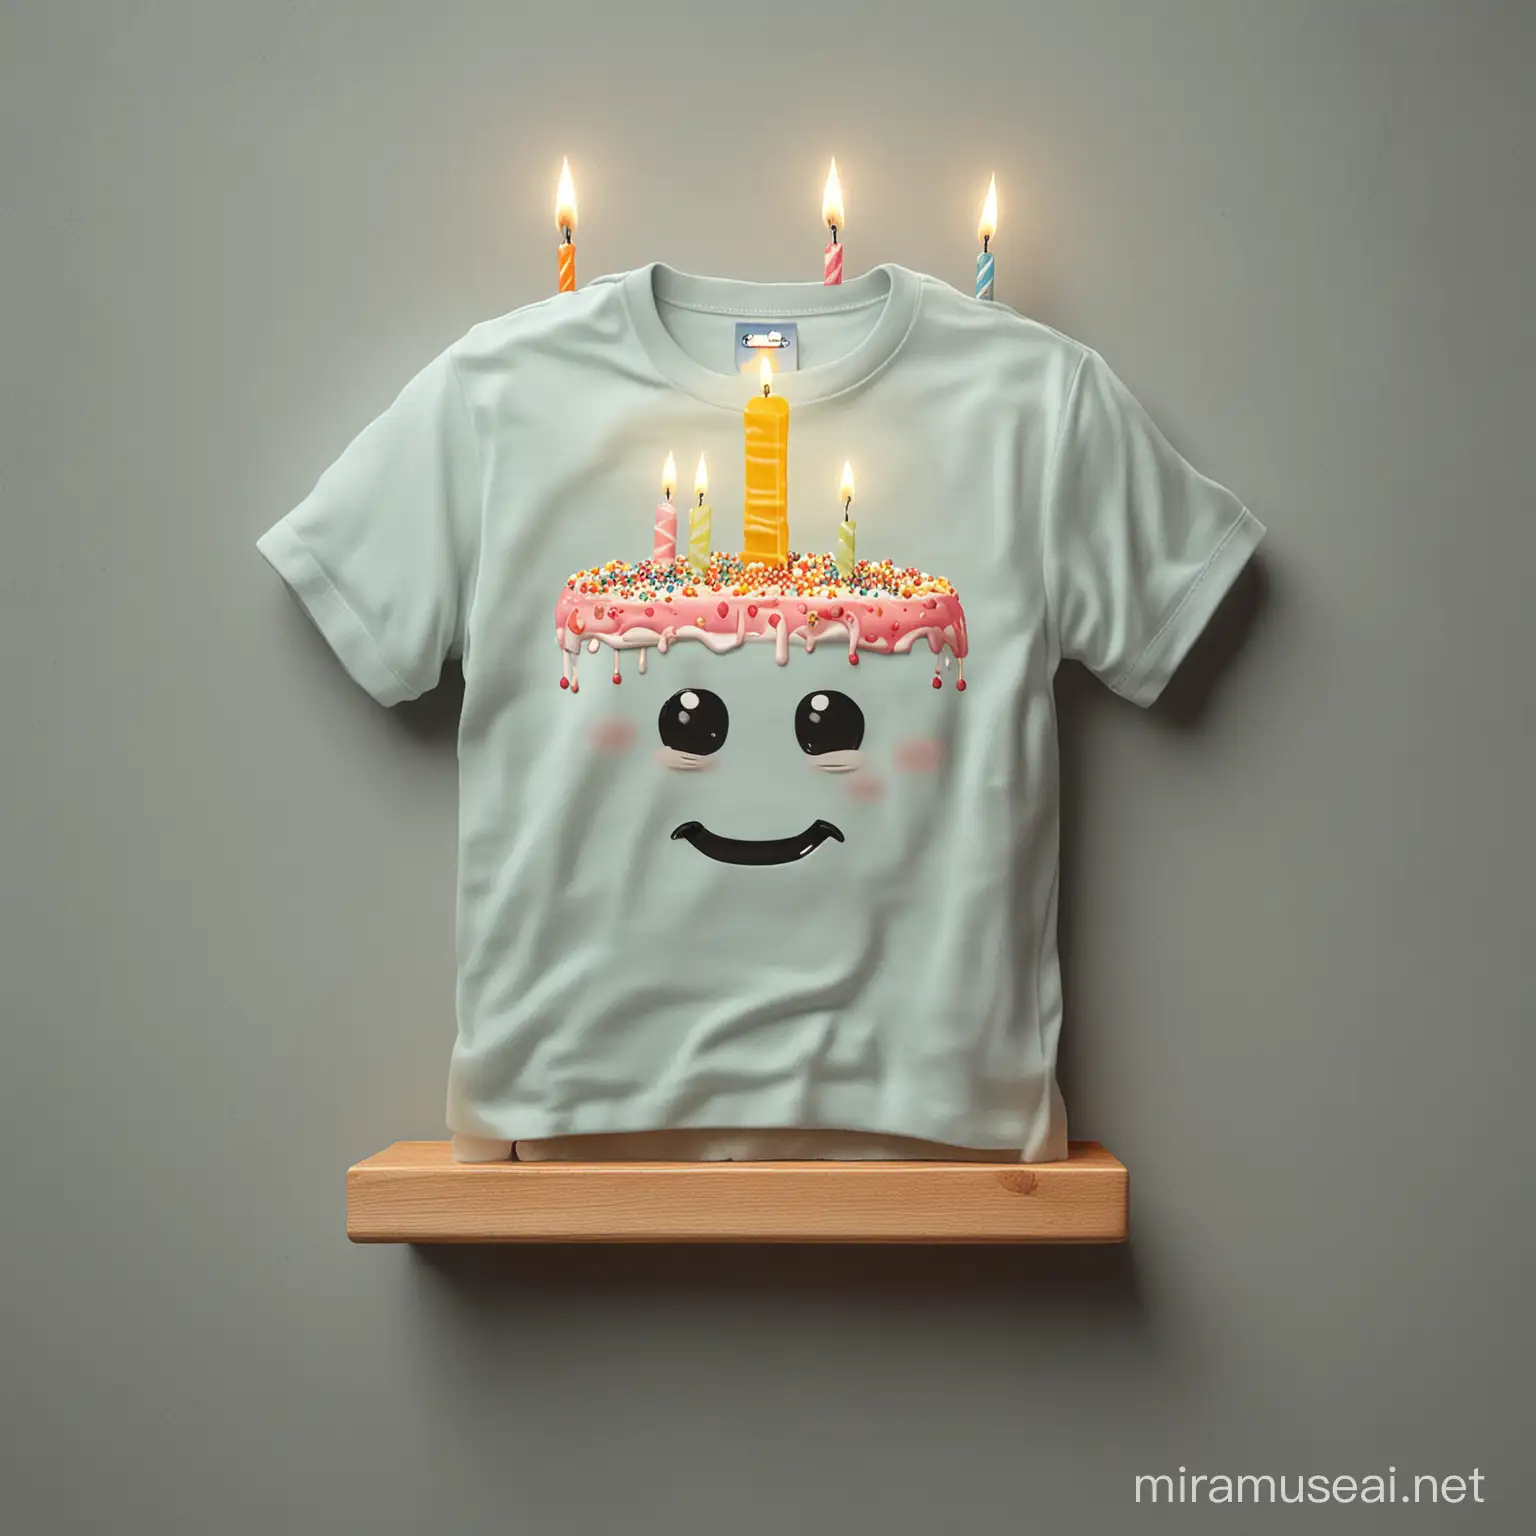 A fun animation of a T-shirt birthday cake with candles marked Tee Positive